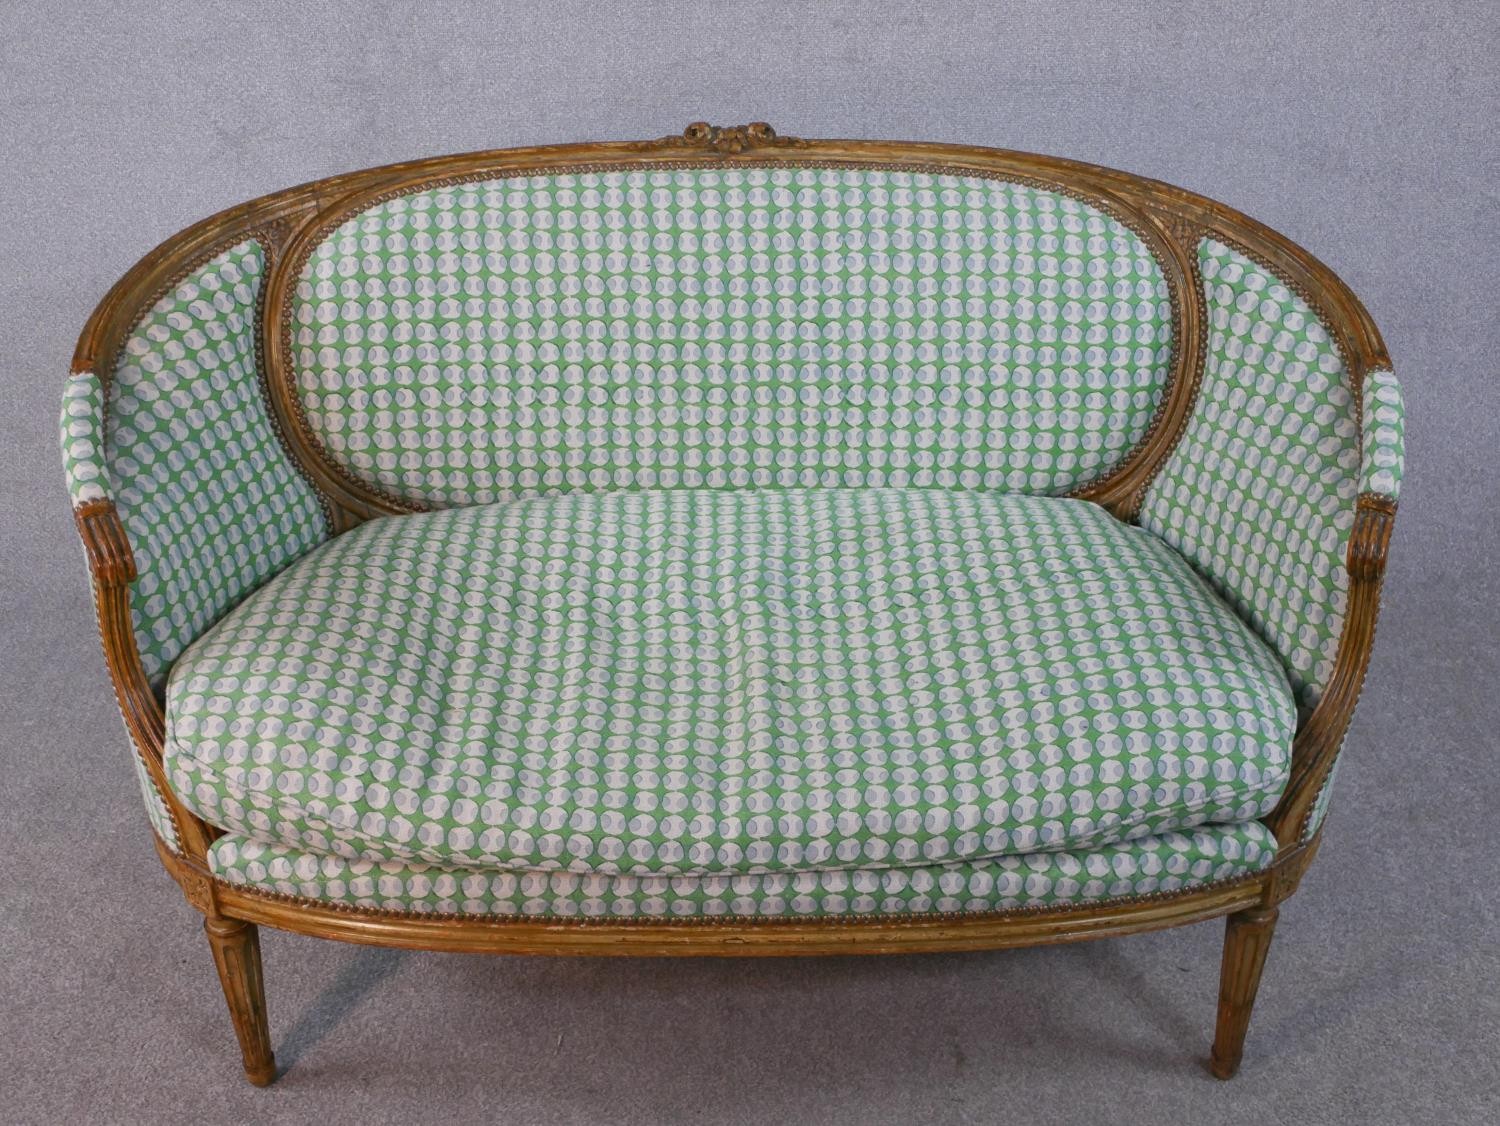 A carved Louis XVI style canape reupholstered in a retro style pale sage patterned material. H.91 - Image 4 of 6